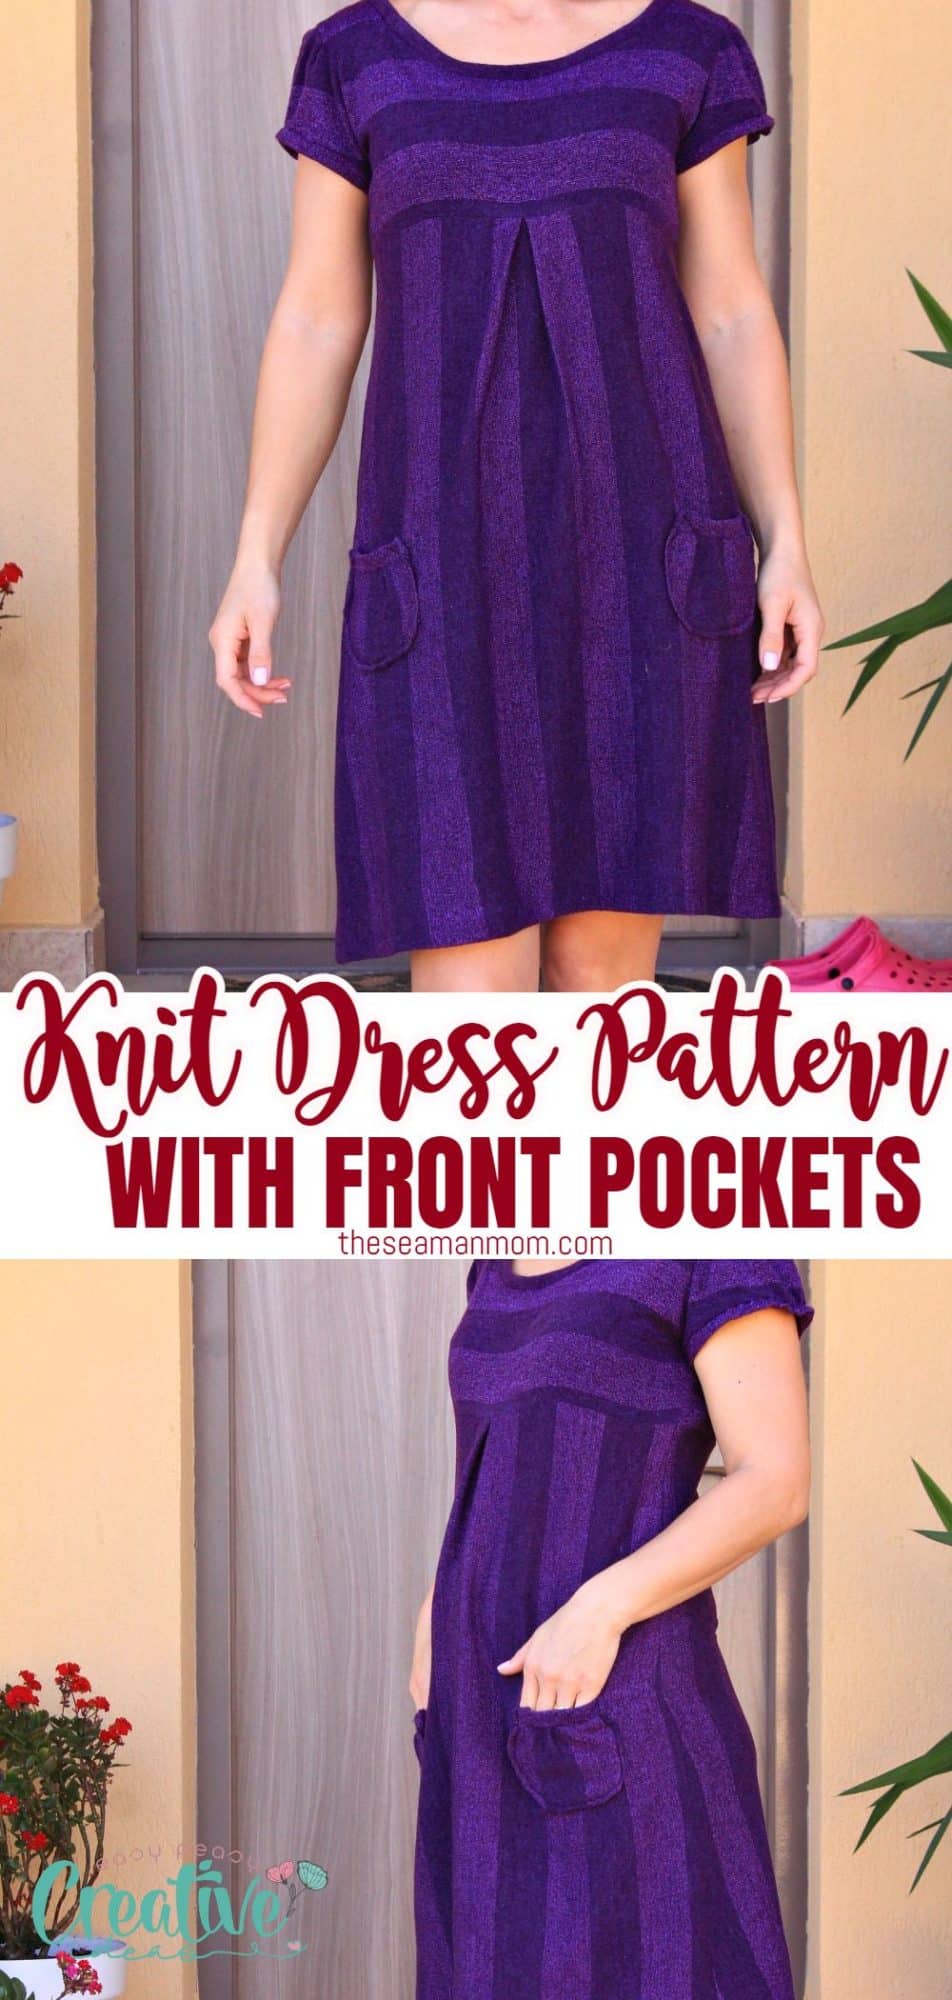 Photo collage of knit dress pattern with front pockets